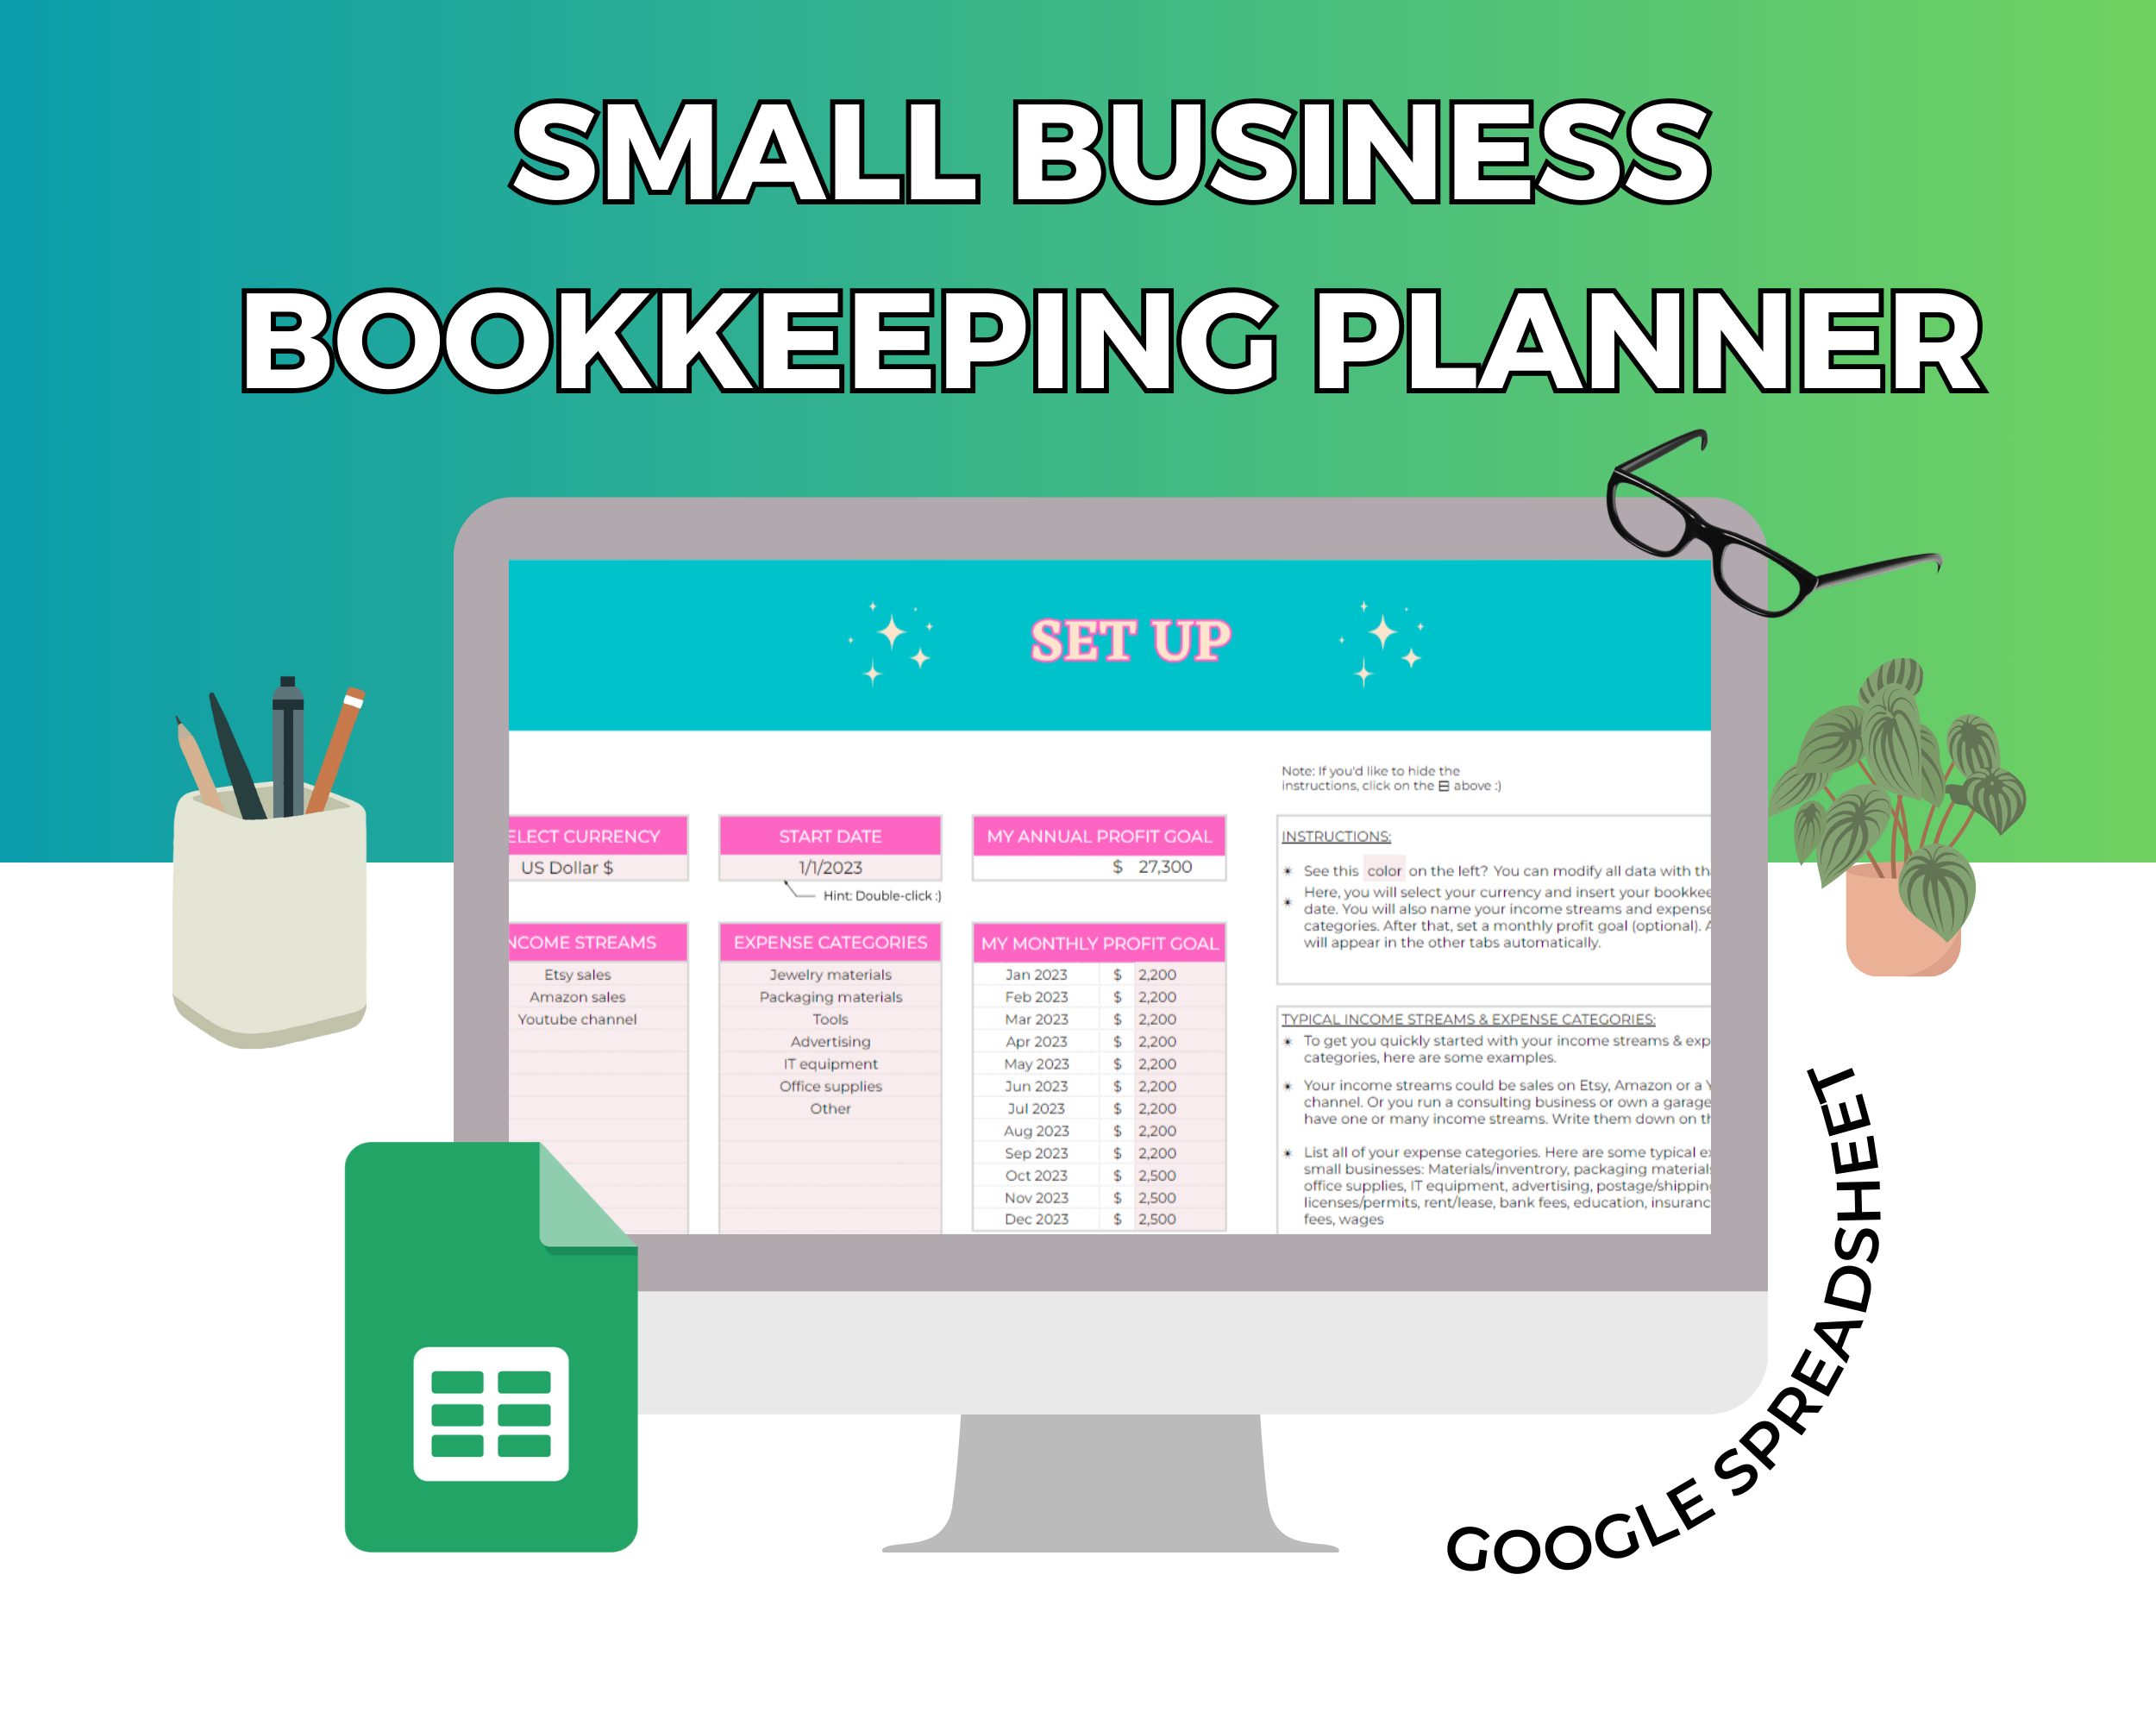 Small Business Bookkeeping Planner Google Spreadsheet | Simple Small Business Bookkeeping Planner Google Sheets